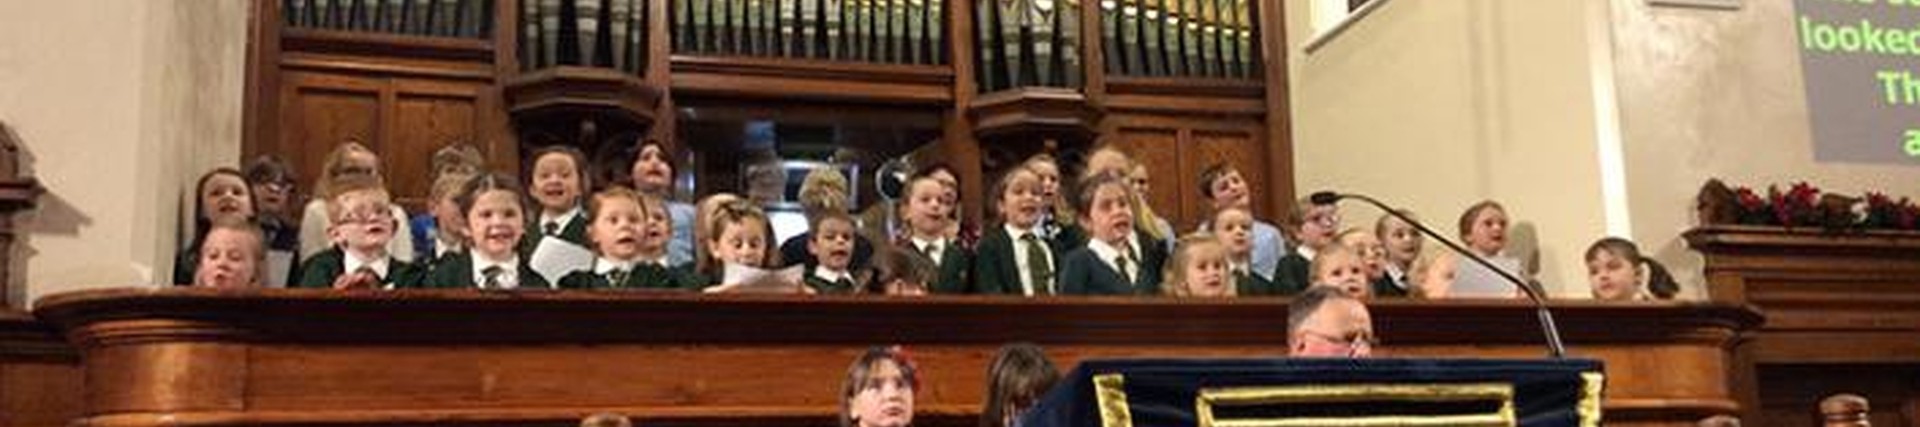 Pupils in singing in a choir in a church setting 